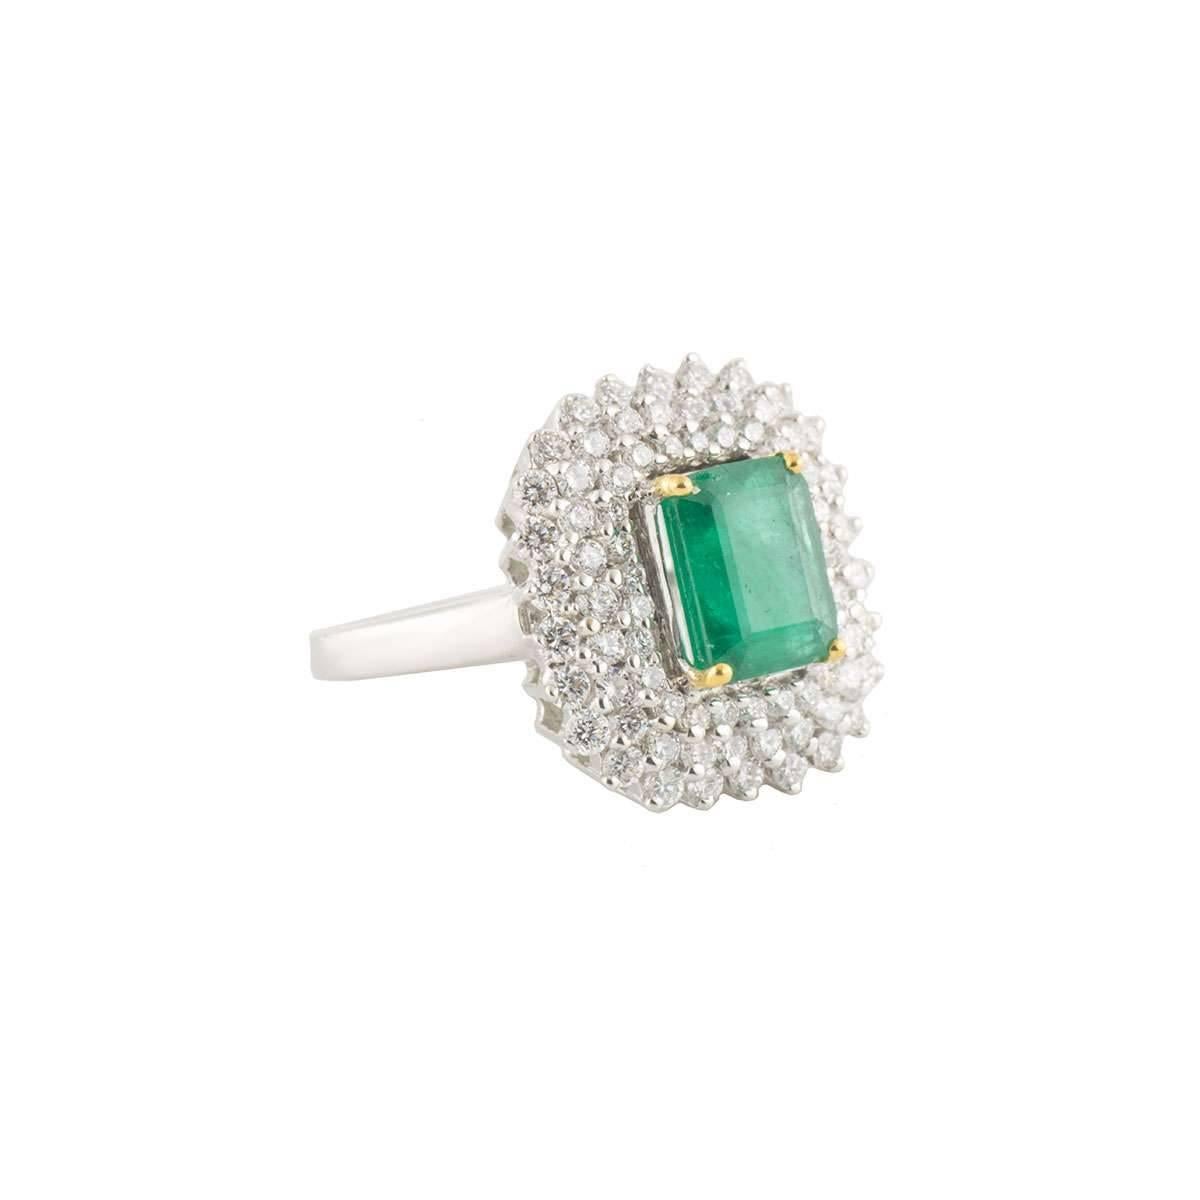 A beautiful 18k white gold diamond and emerald dress ring. The ring comprises of a emerald cut emerald with a weight of 2.49ct with a deep green throughout. Complimenting the emerald are 78 round brilliant cut diamonds set over 3 graduated with 3